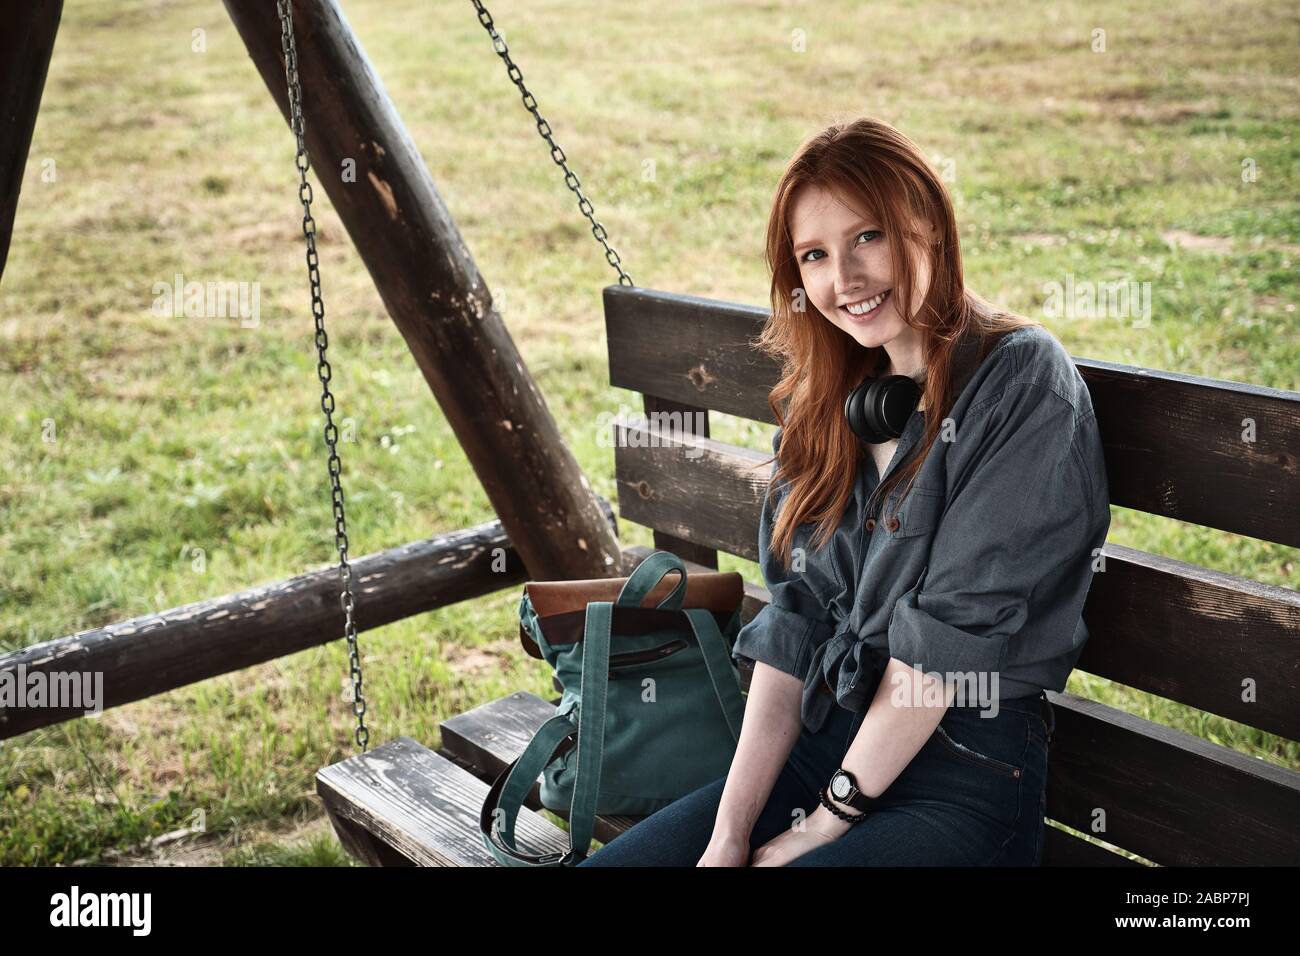 Redhead girl in a denim shirt sits with a backpack on a wooden swing bench and smiles into the frame. Stock Photo